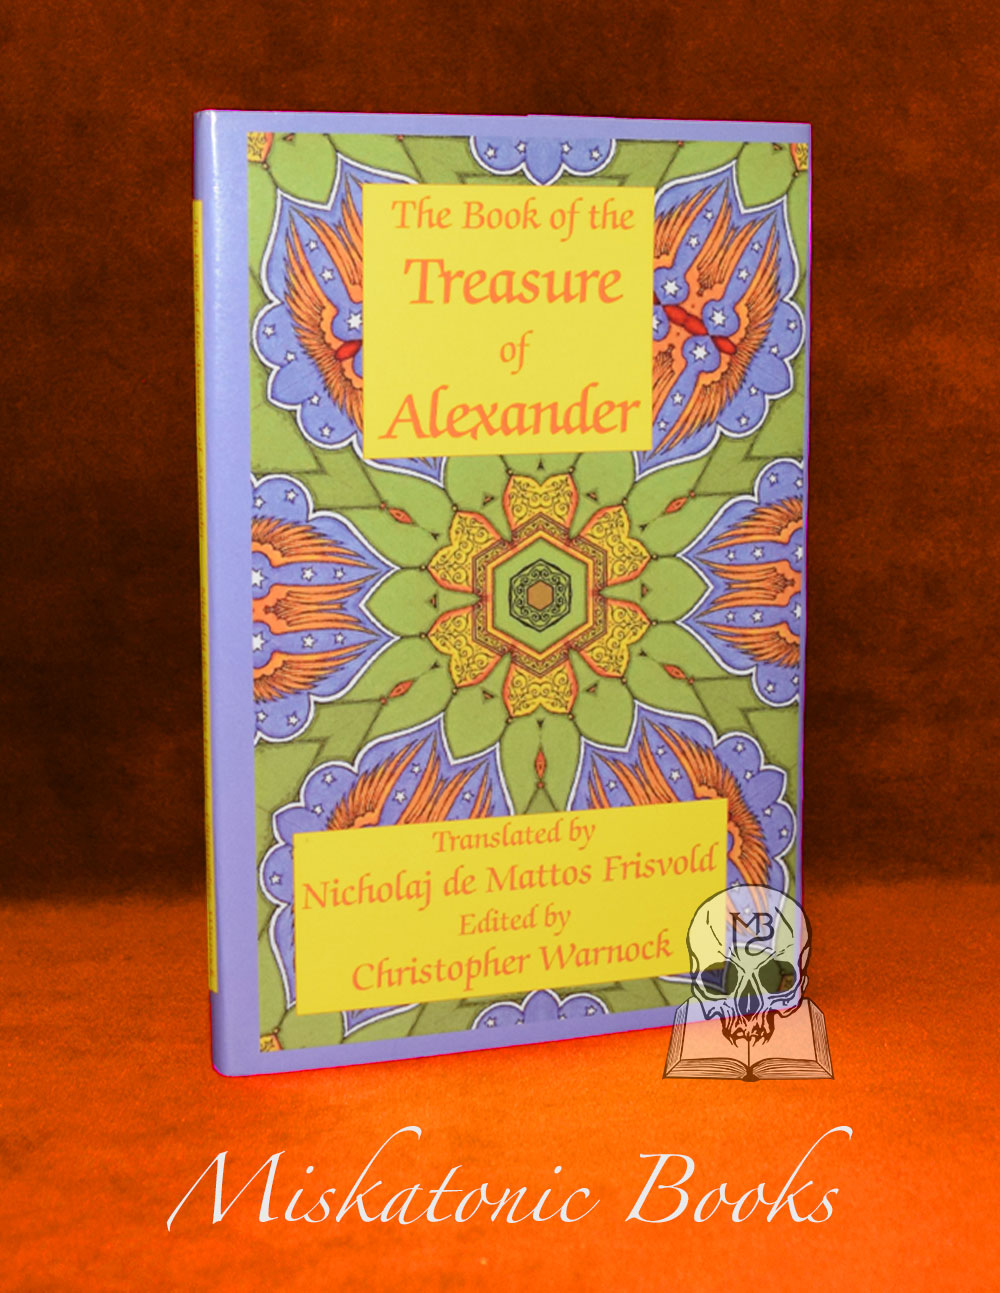 BOOK OF THE TREASURE OF ALEXANDER: Ancient Hermetic Alchemy & Astrology edited by Christopher Warnock, translated by Nicholaj de Mattos Frisvold - Rare Hardcover First Edition